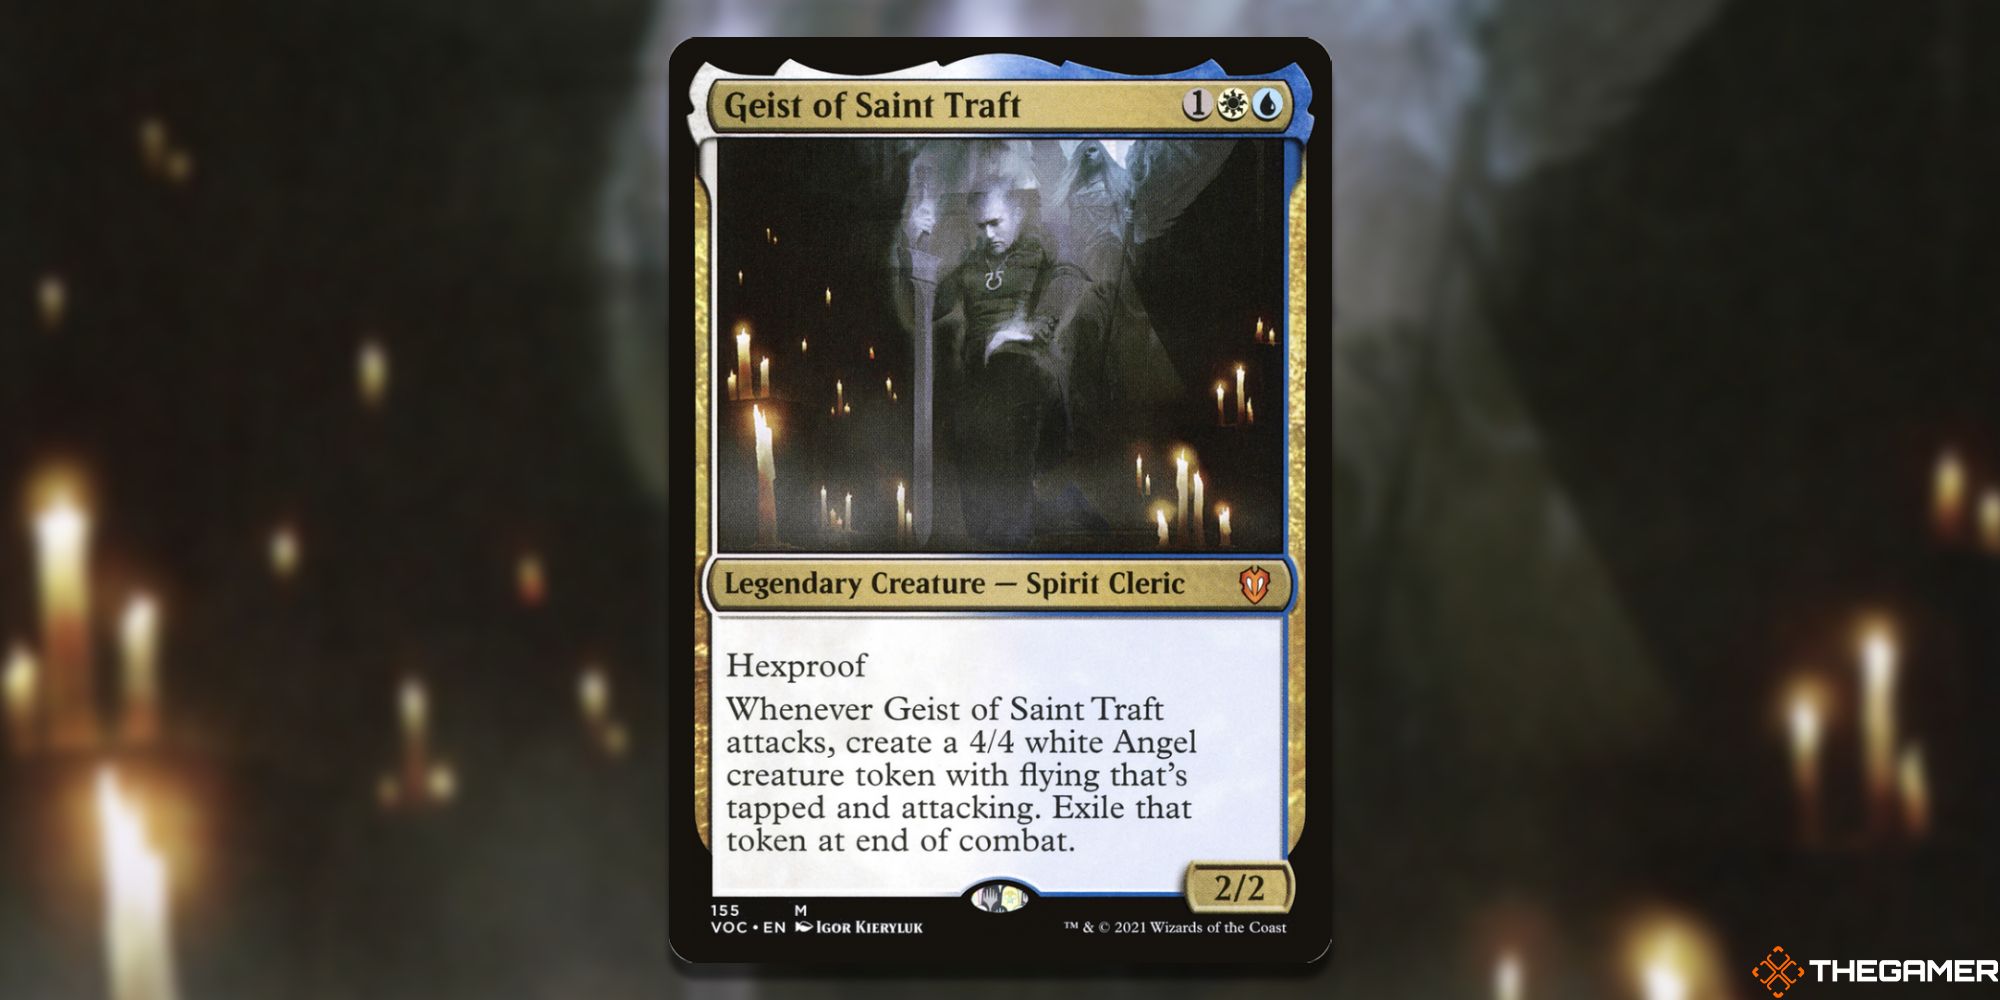 Image of the Geist of Saint Traft card in Magic: The Gathering, with art by Igor Kierluk